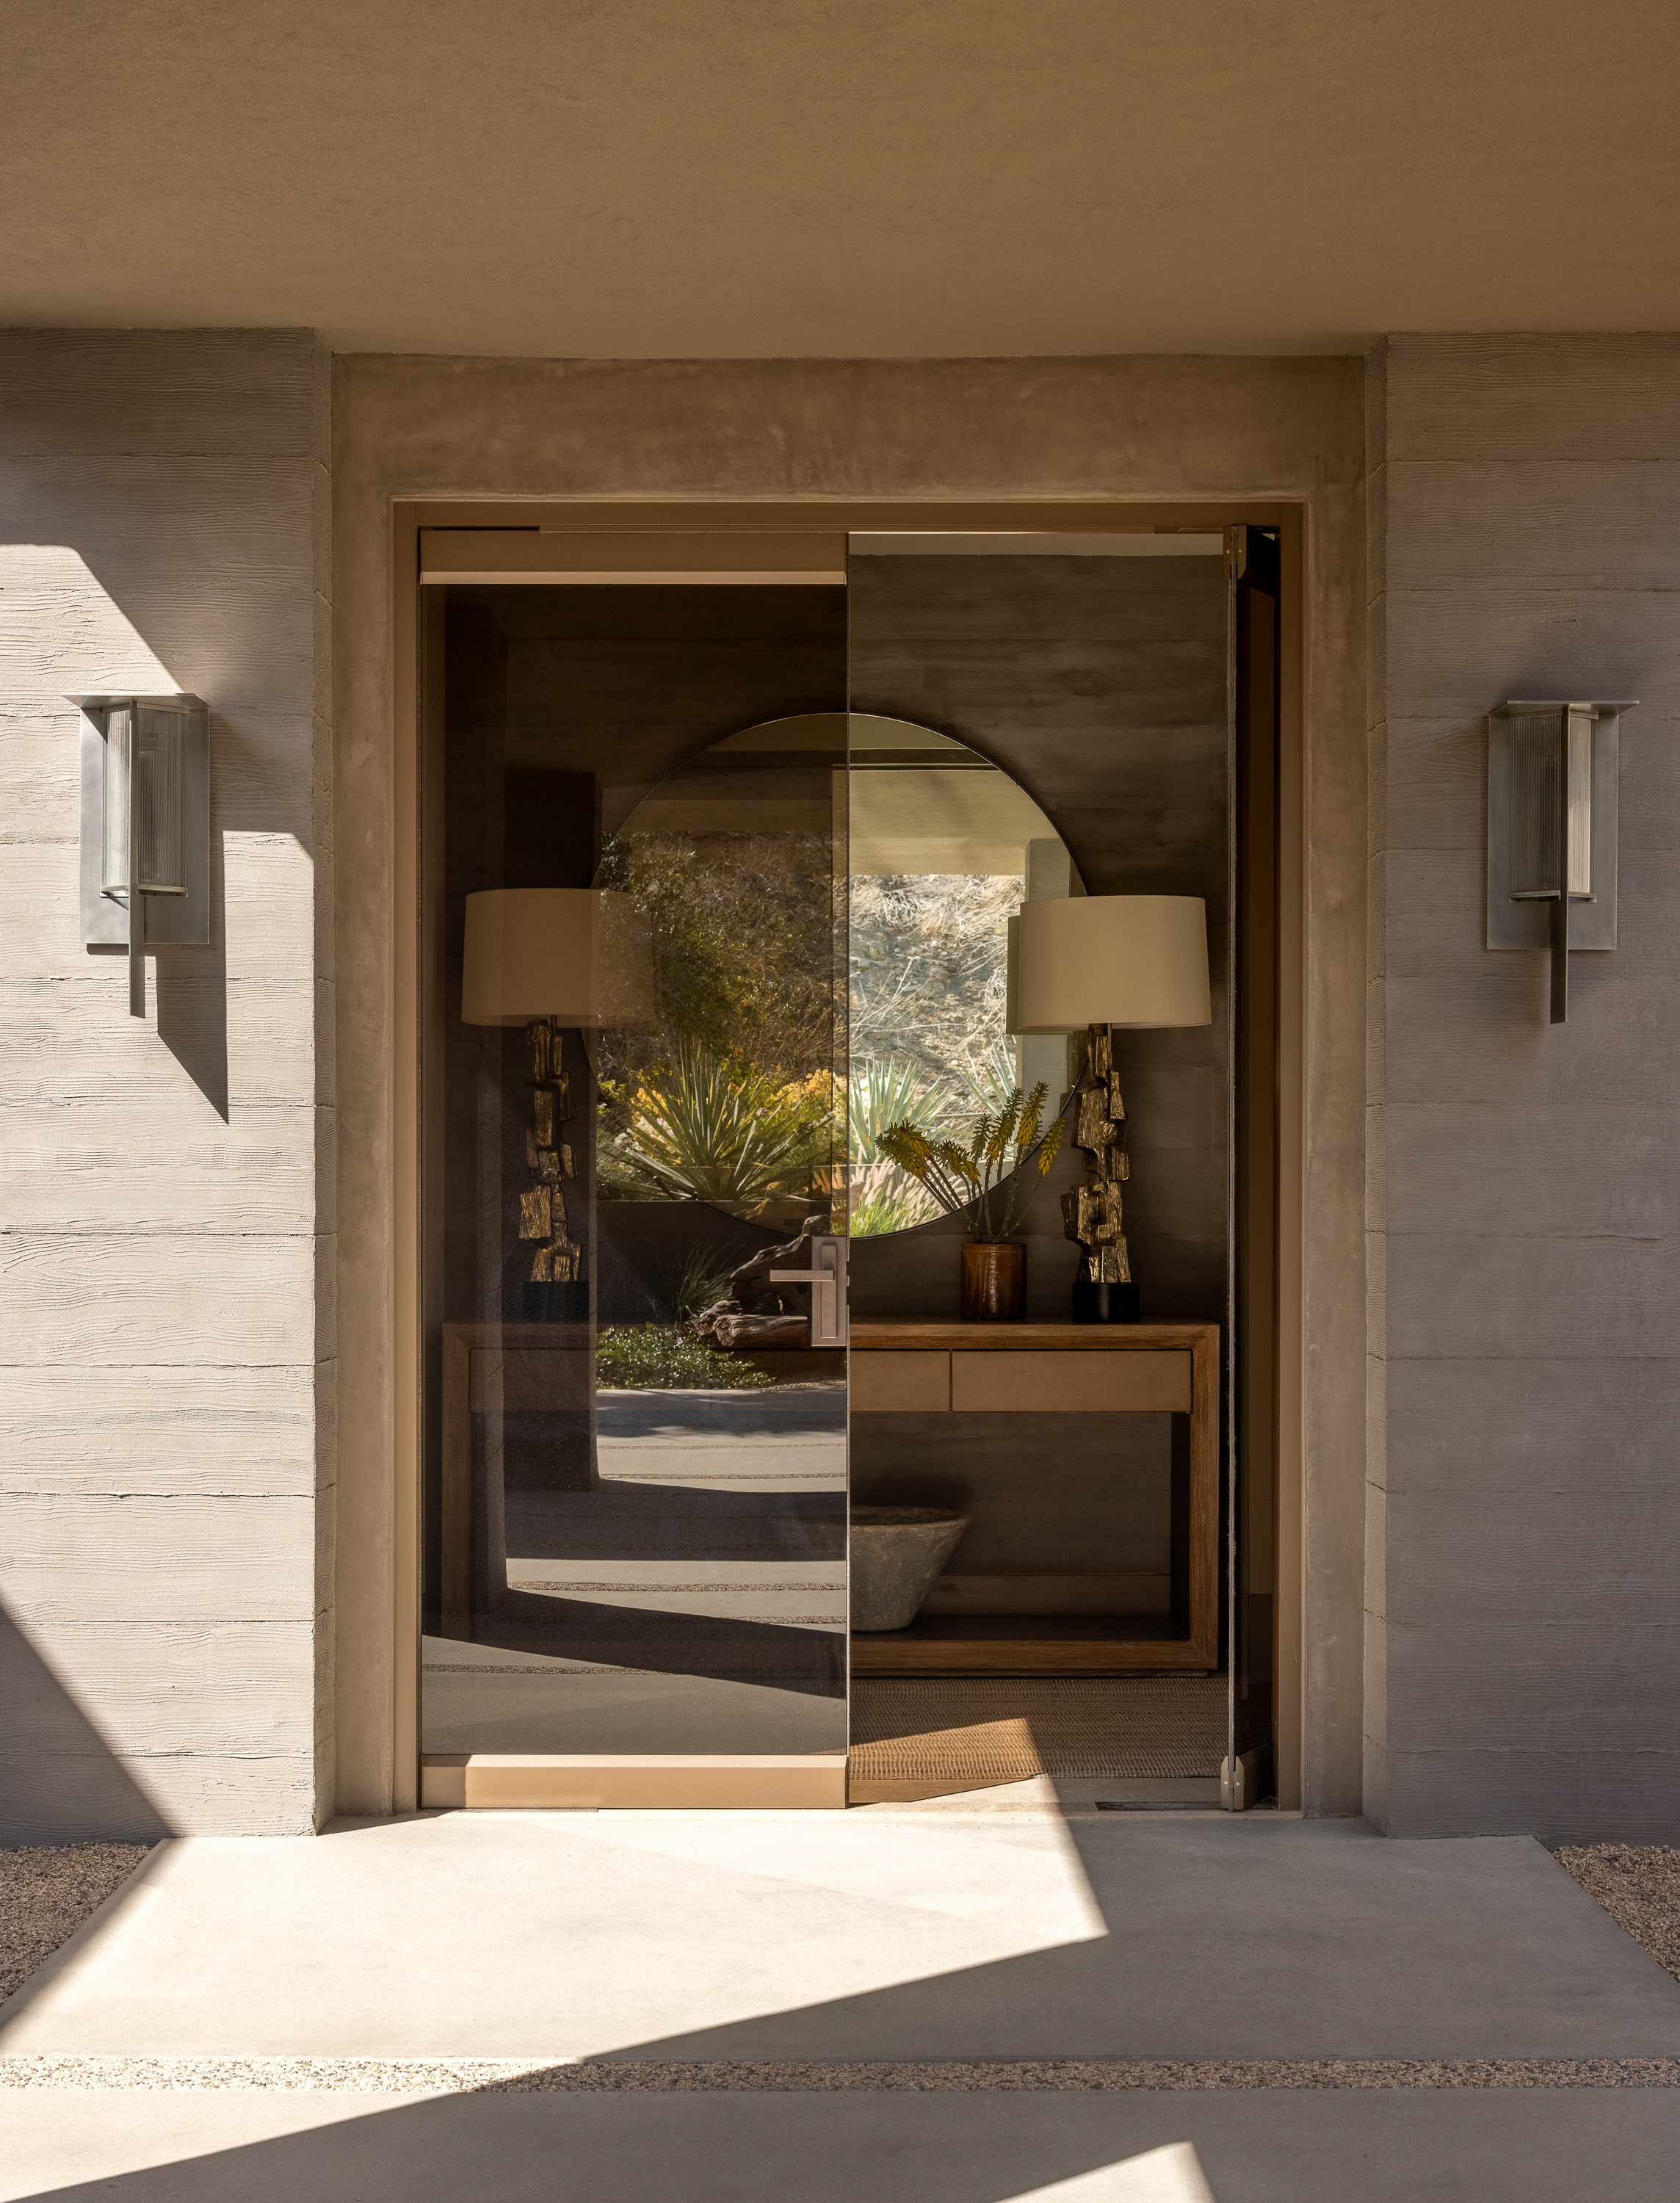 Grand entrance: concrete siding, double glass doors. One ajar, revealing brutalist lamps on an entry console and a giant circular mirror above.